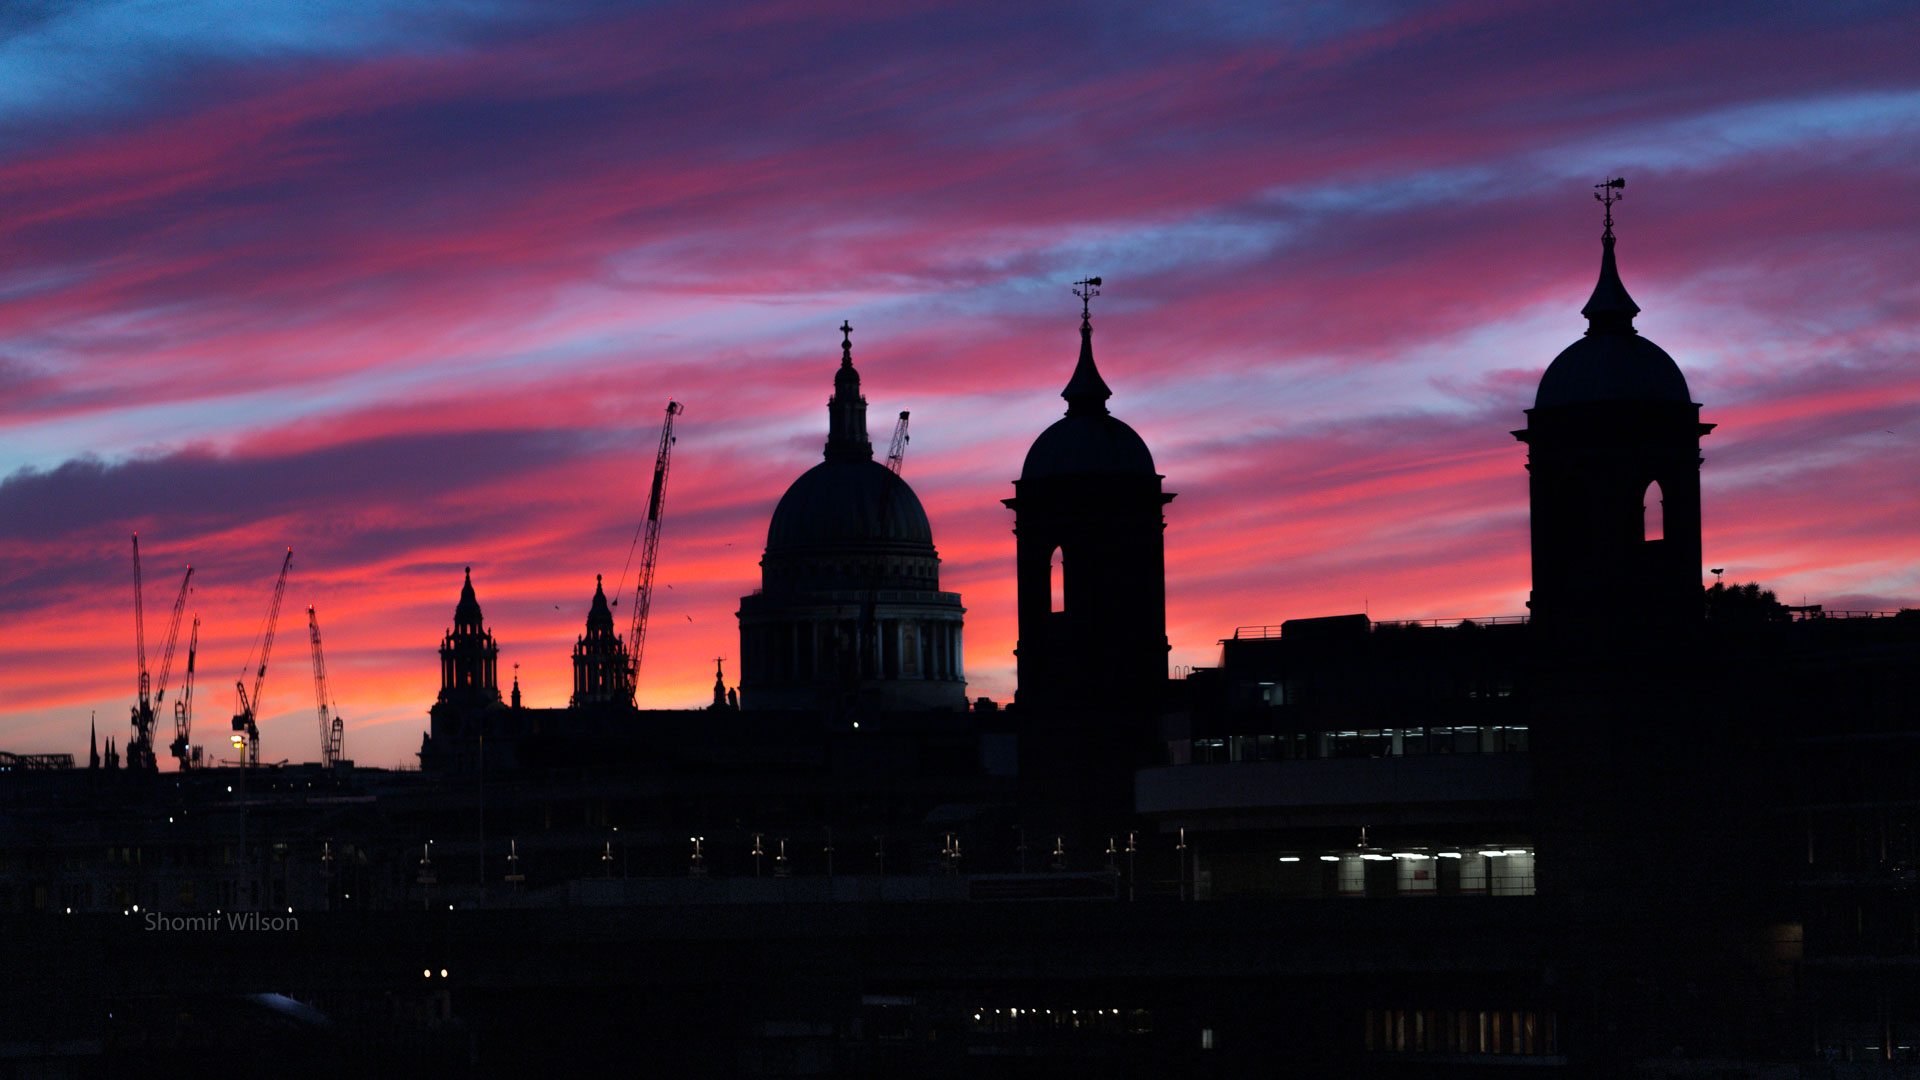 silhouettes of domed buildings and construction cranes against wispy red sunset clouds